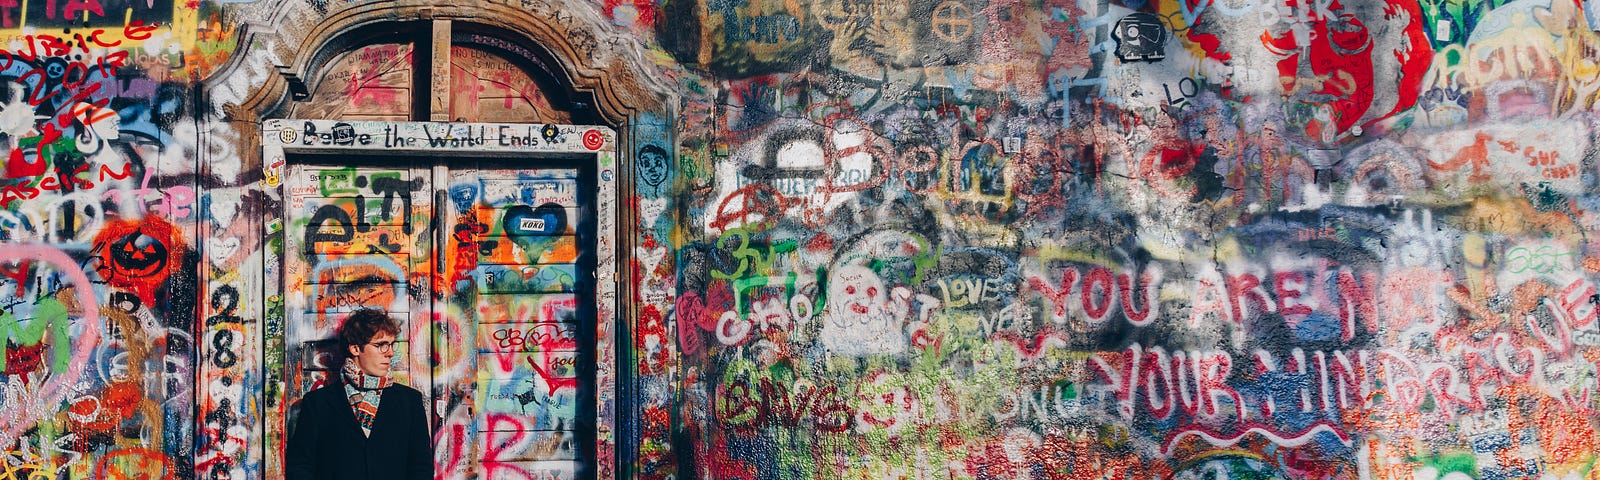 “Once a normal wall, since the 1980s it has been filled with John Lennon-inspired graffiti and pieces of lyrics from Beatles’ songs.”